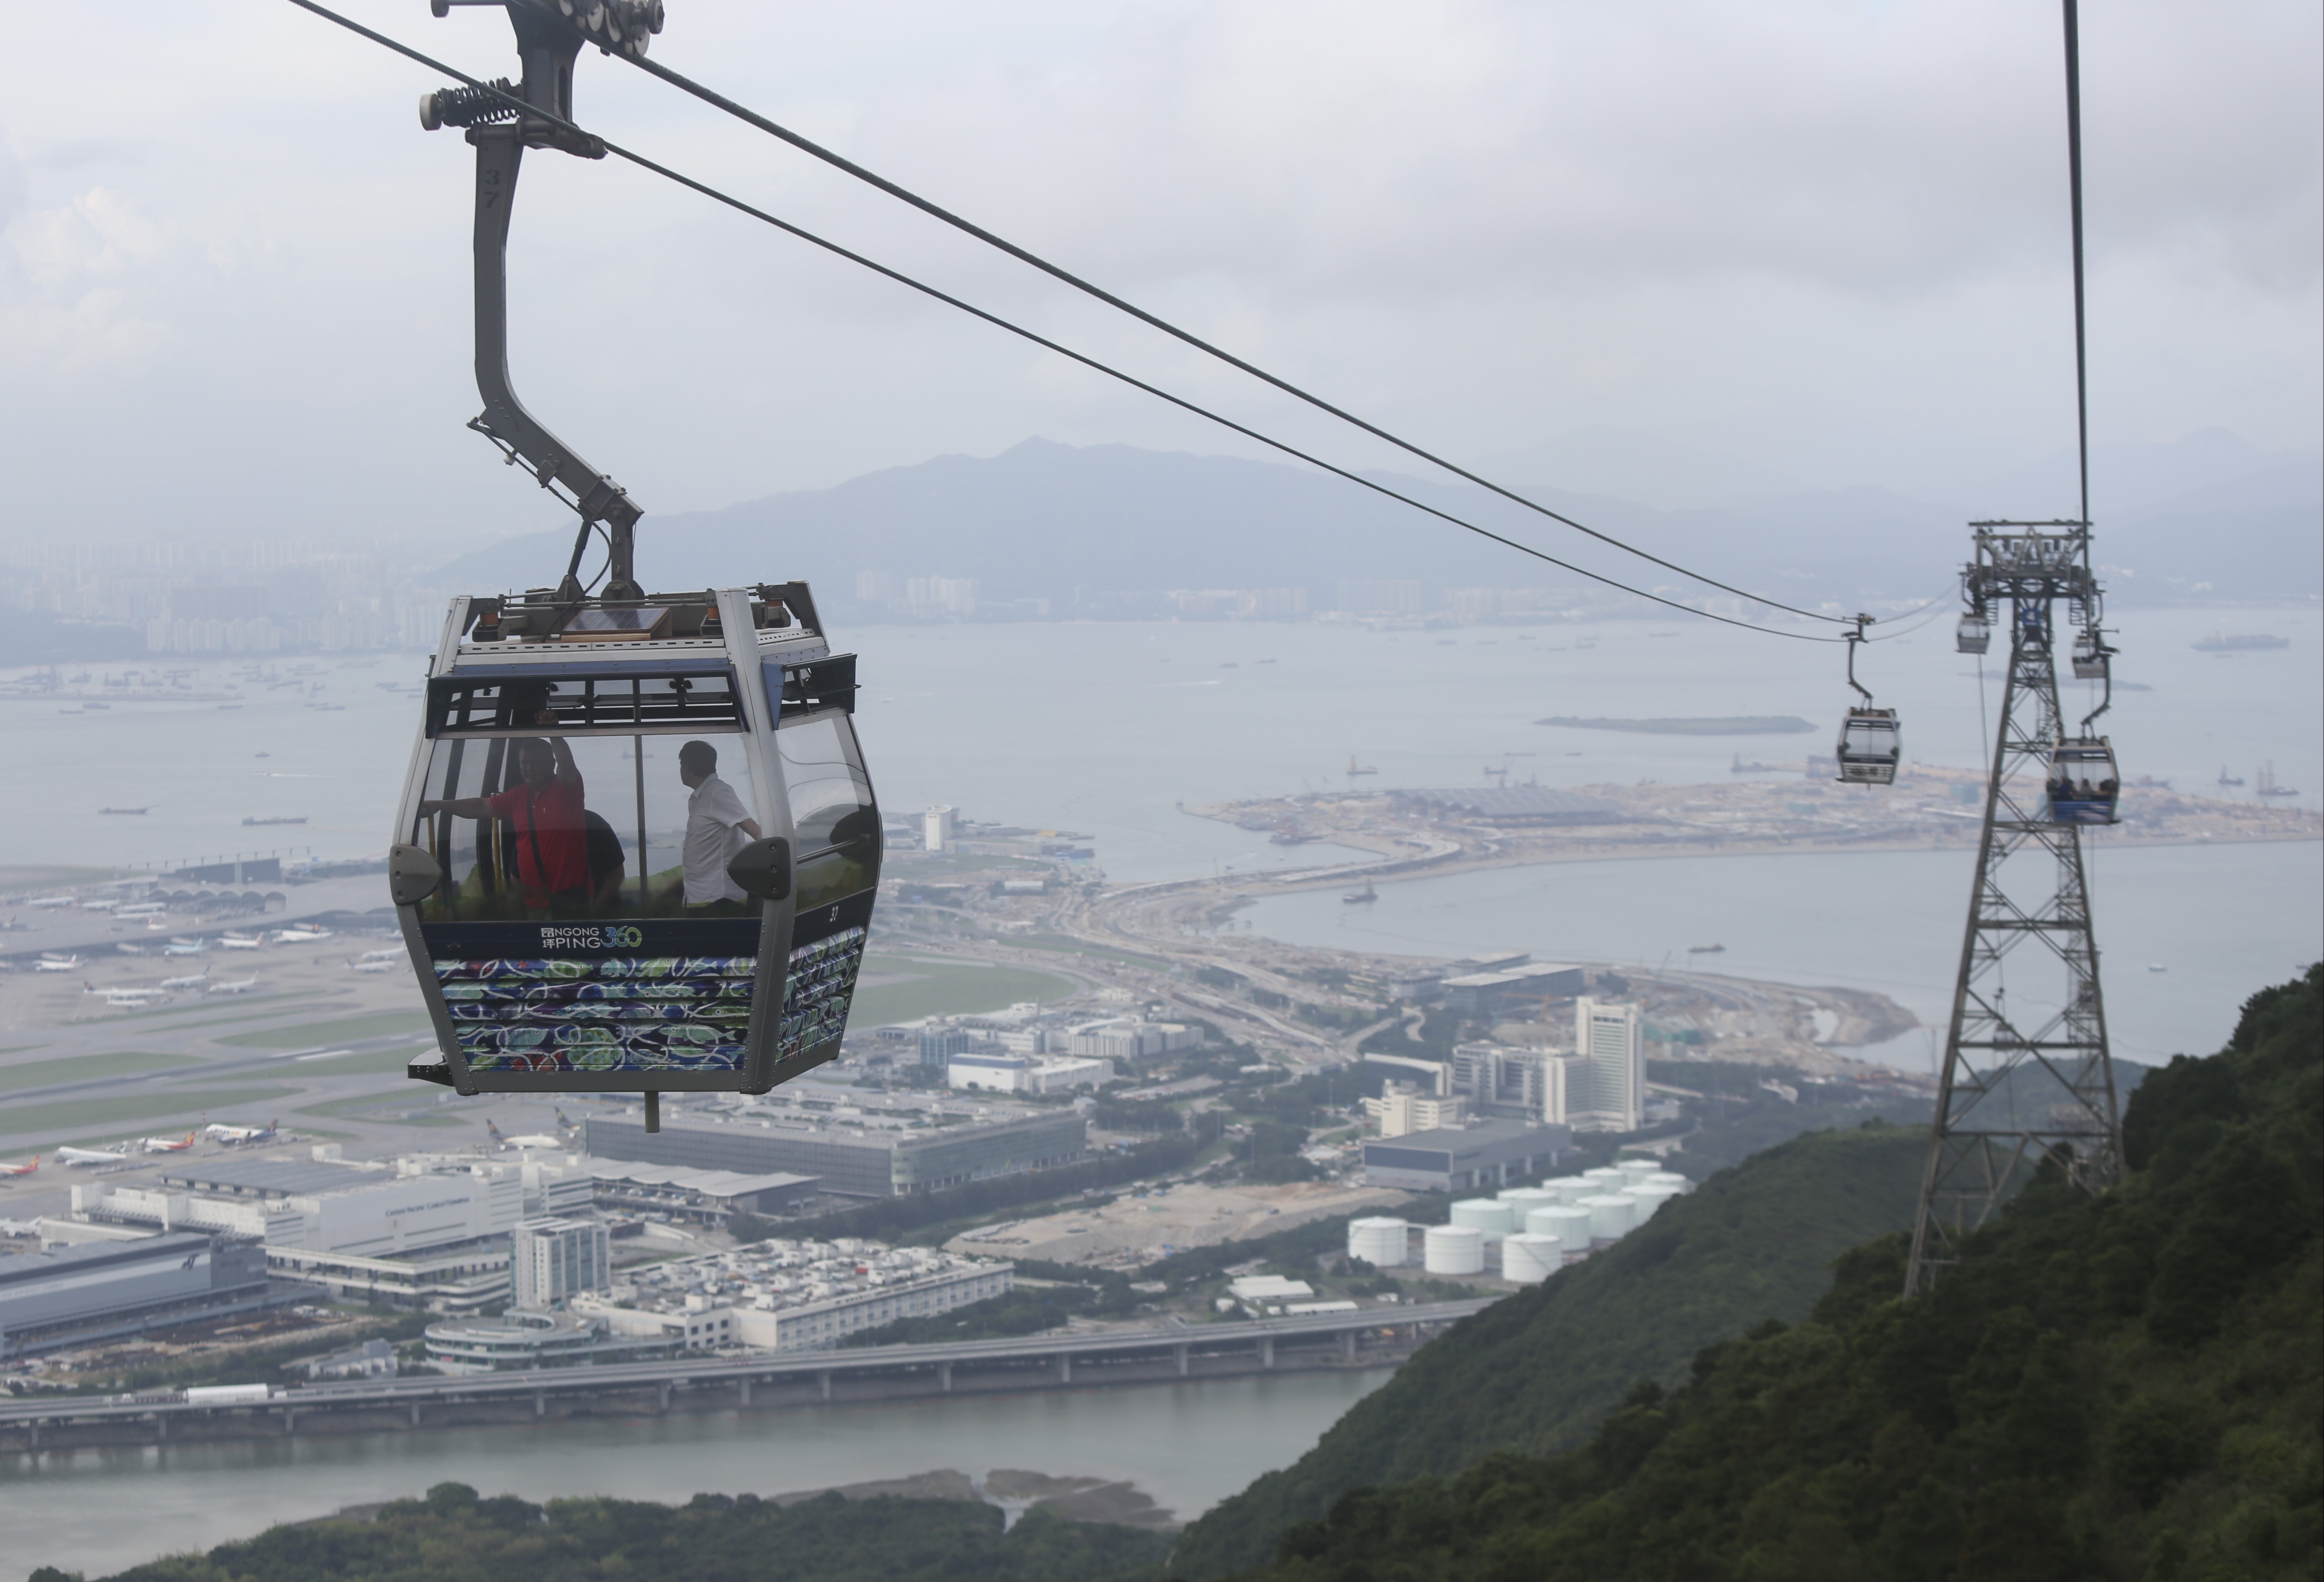 The Ngong Ping 360 cable car in Tung Chung. Photo: Xiaomei Chen